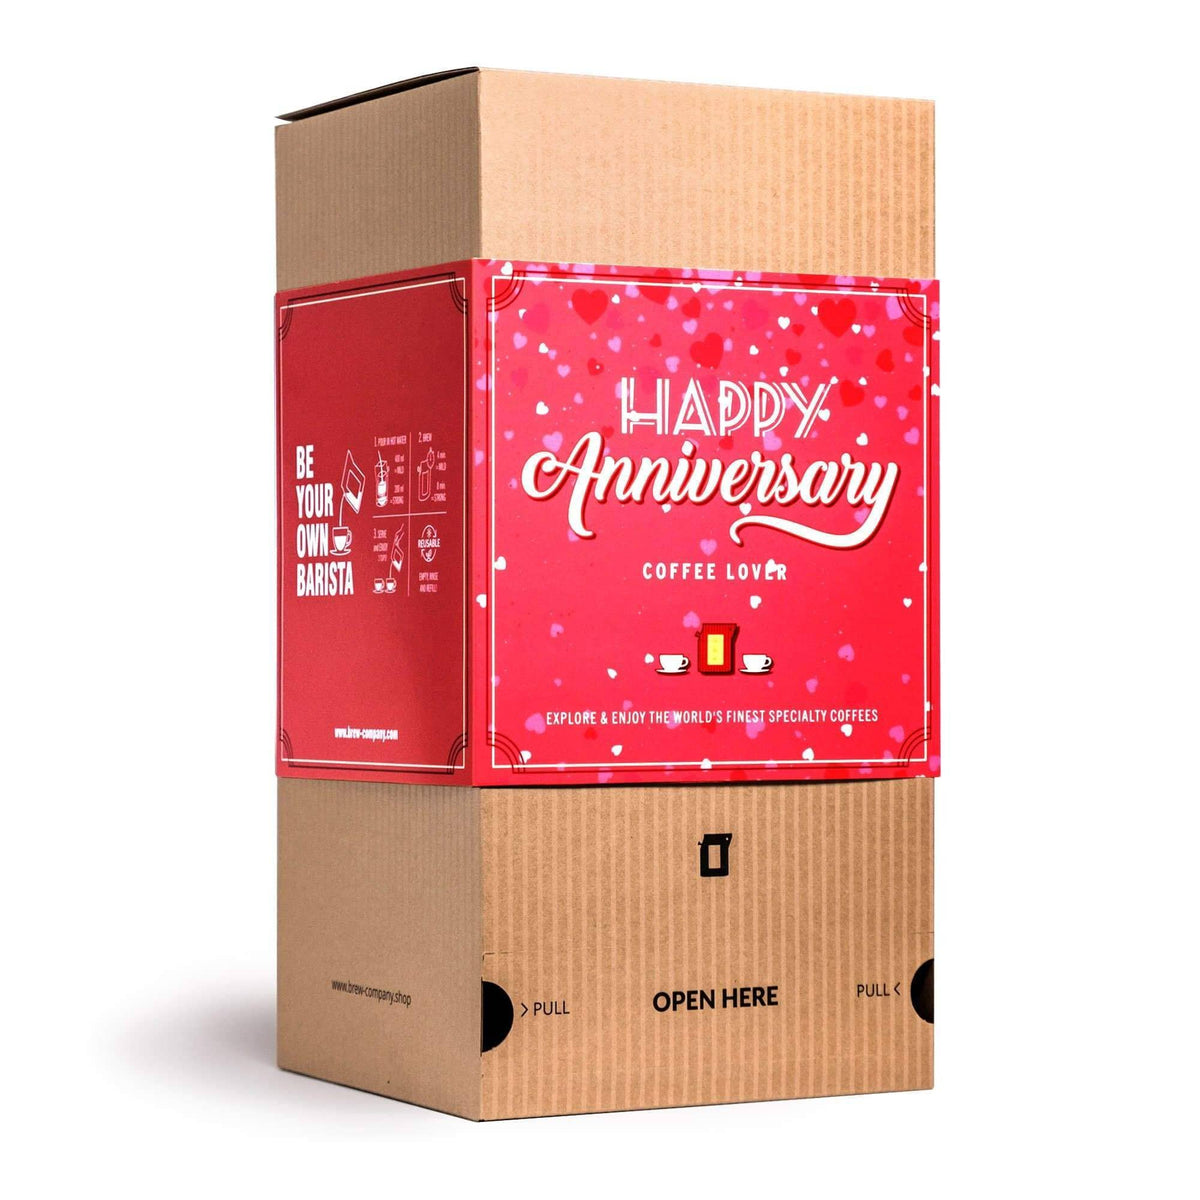 HAPPY ANNIVERSARY COFFEE GIFT BOX - Gift Boxes | The Brew Company